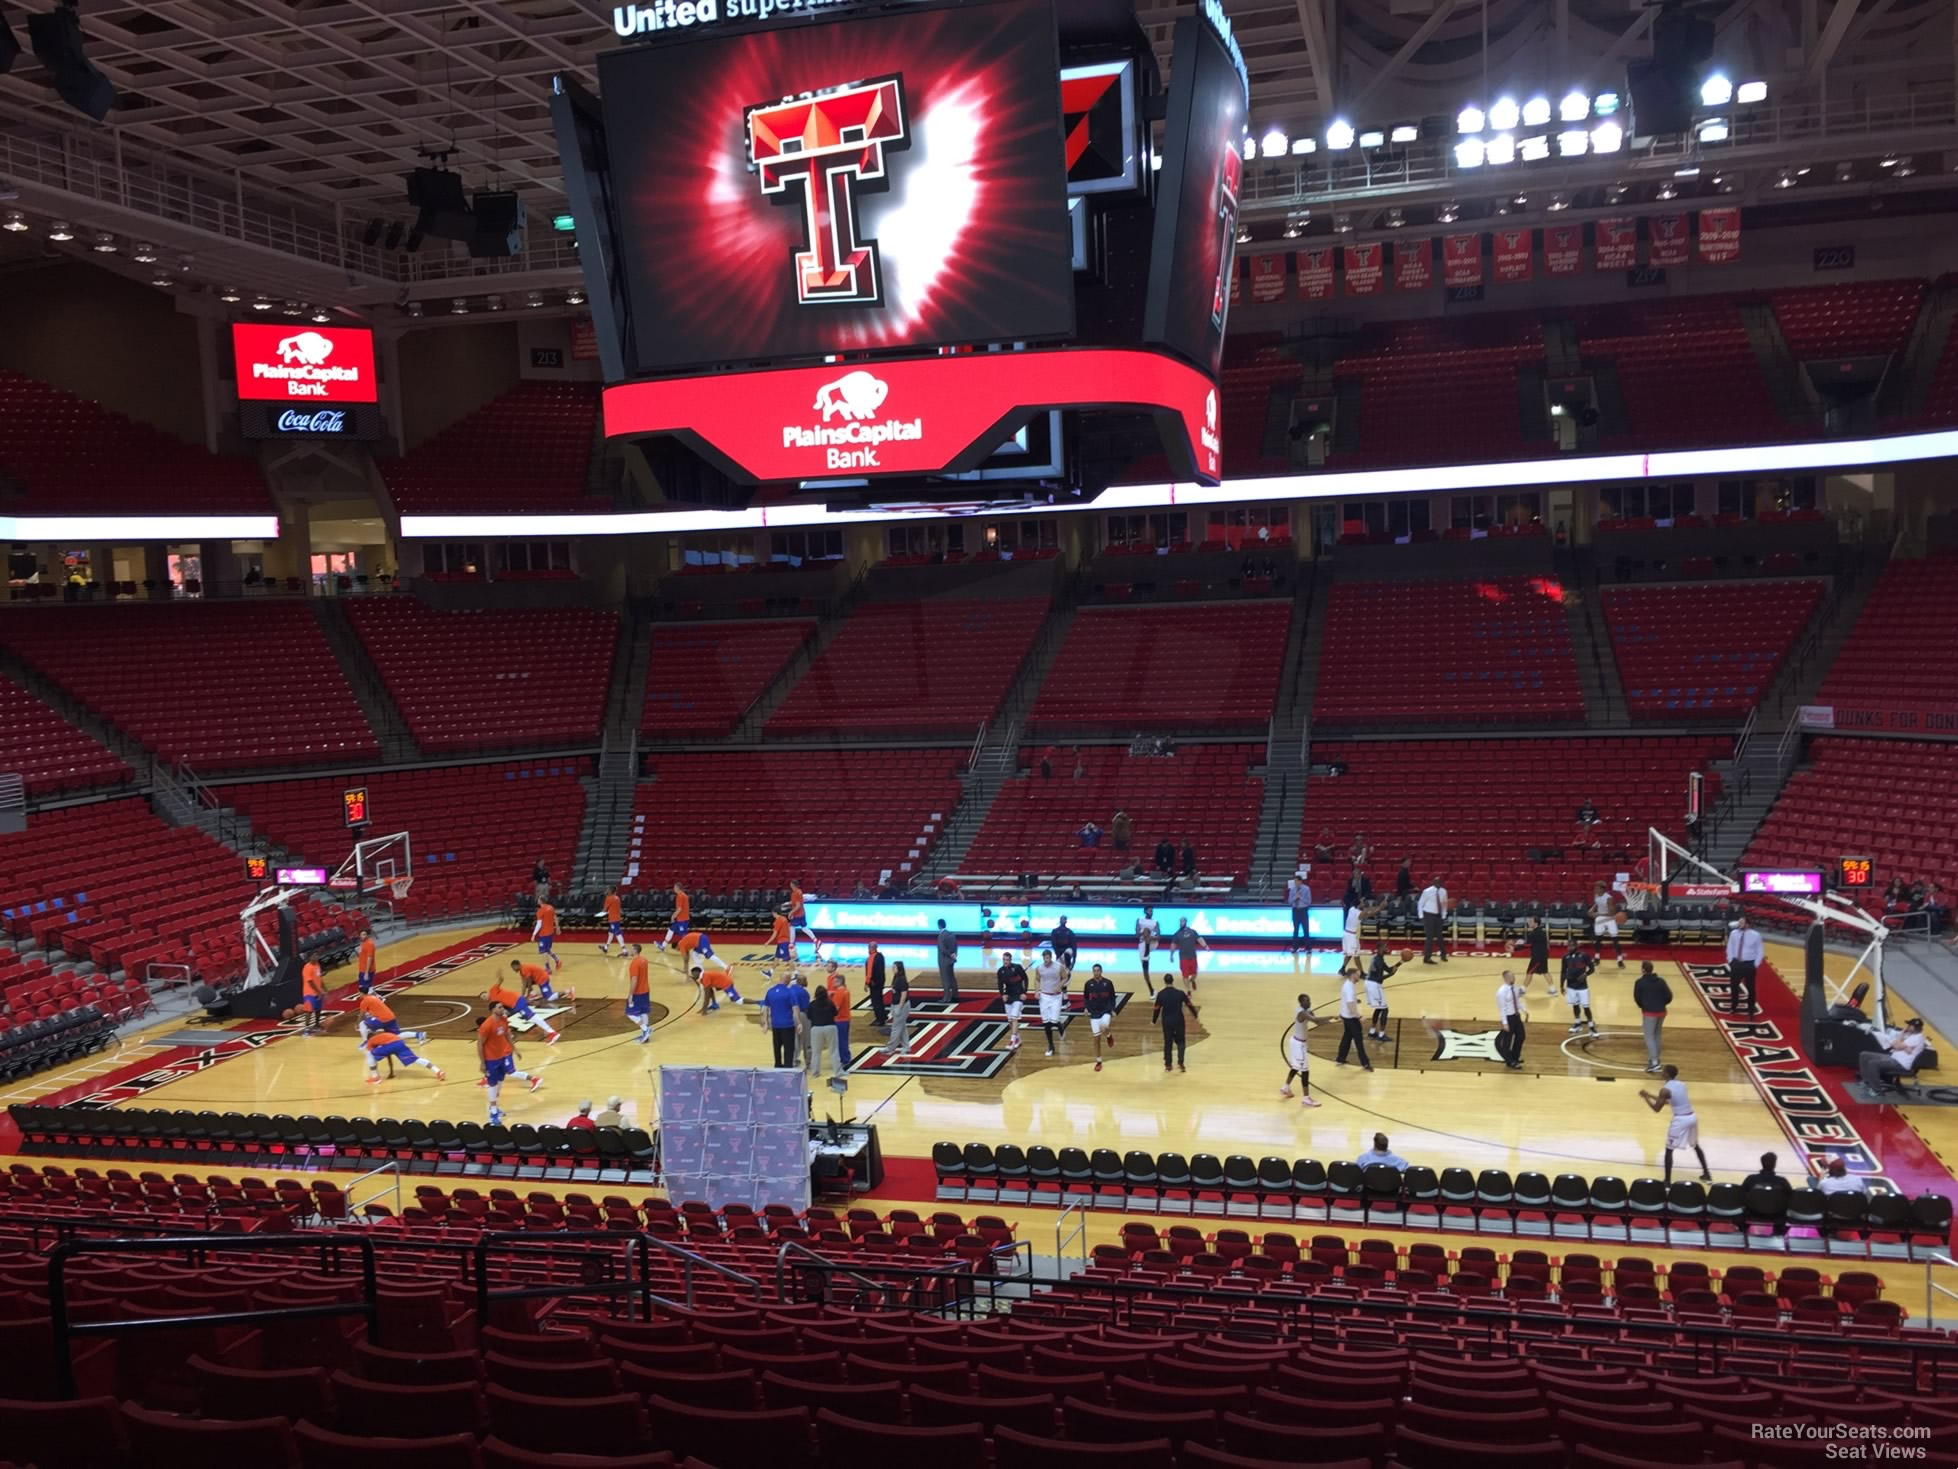 section 124, row 25 seat view  - united supermarkets arena